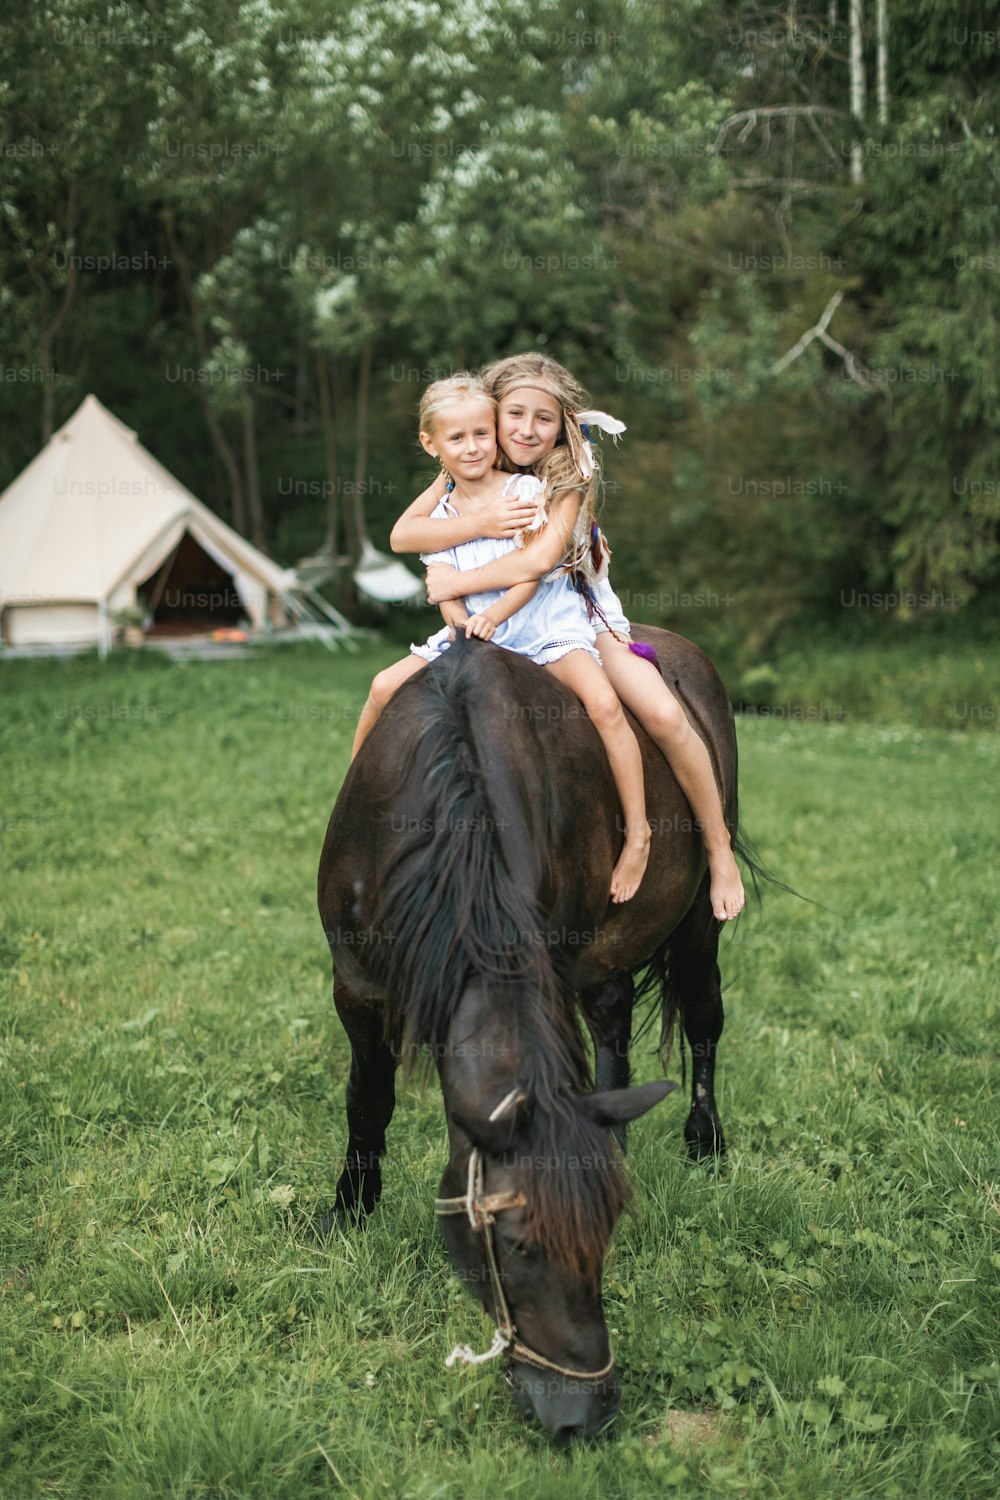 Horseback, two children girls, sisters, riding a horse outdoors, smiling and hugging each other. Girls riding a horse in meadow in summer. Wigwam tents, white teepee tent and trees on the background.